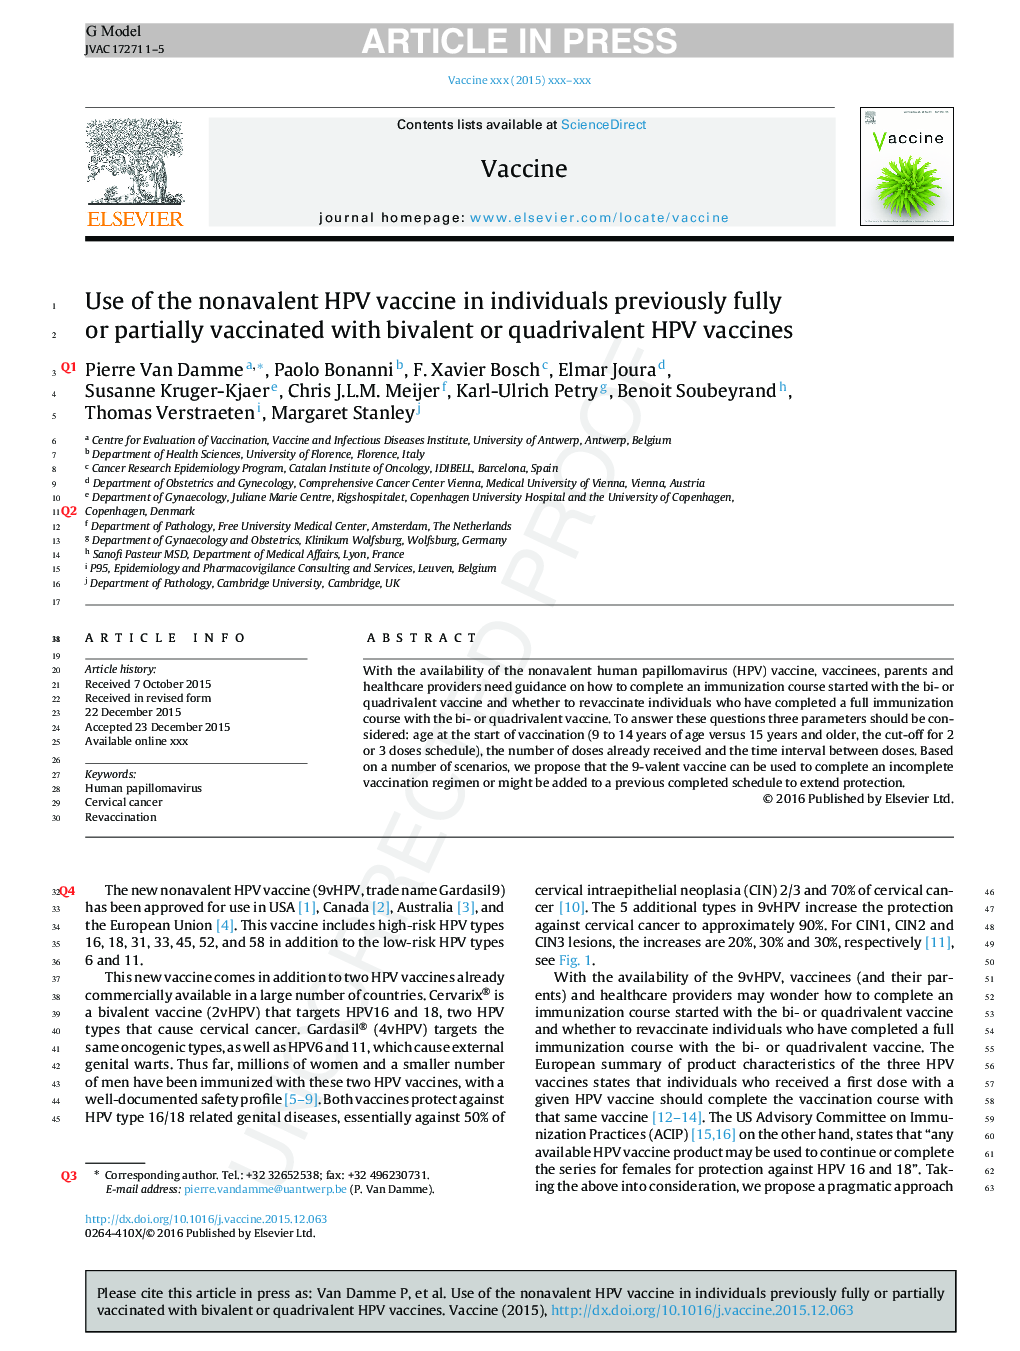 Use of the nonavalent HPV vaccine in individuals previously fully or partially vaccinated with bivalent or quadrivalent HPV vaccines